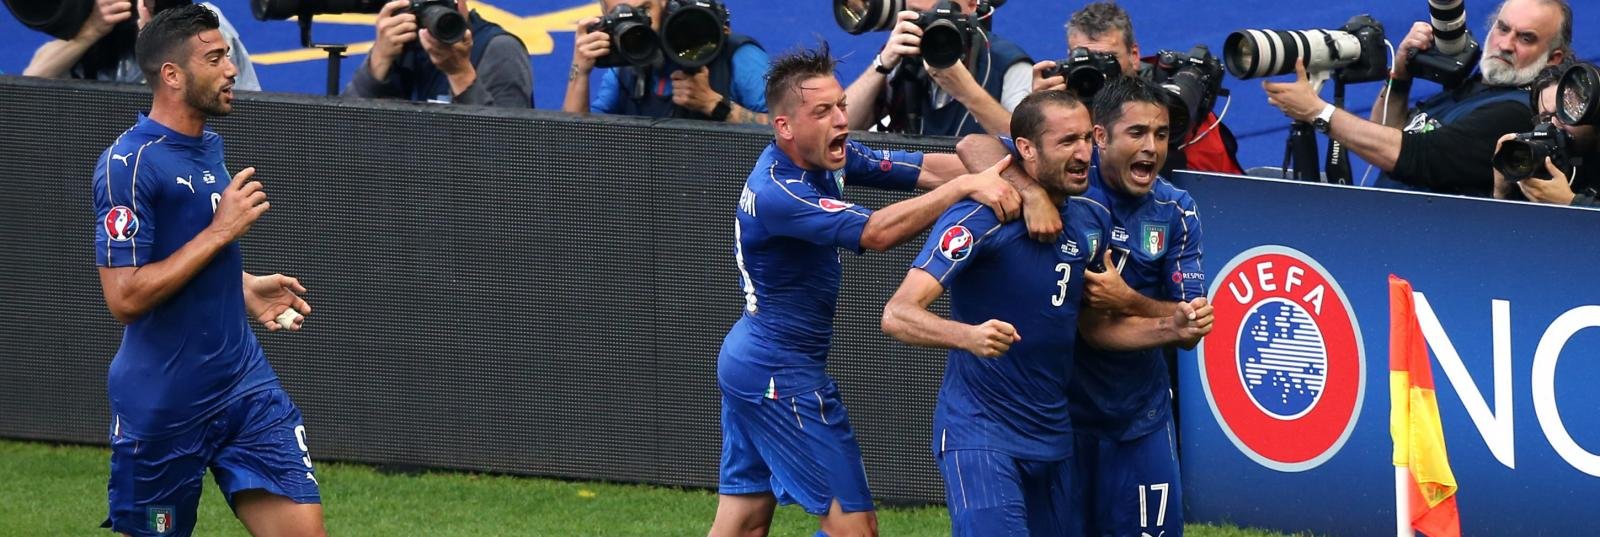 Italy 2-0 Spain: EURO 2016 Round of 16 Report